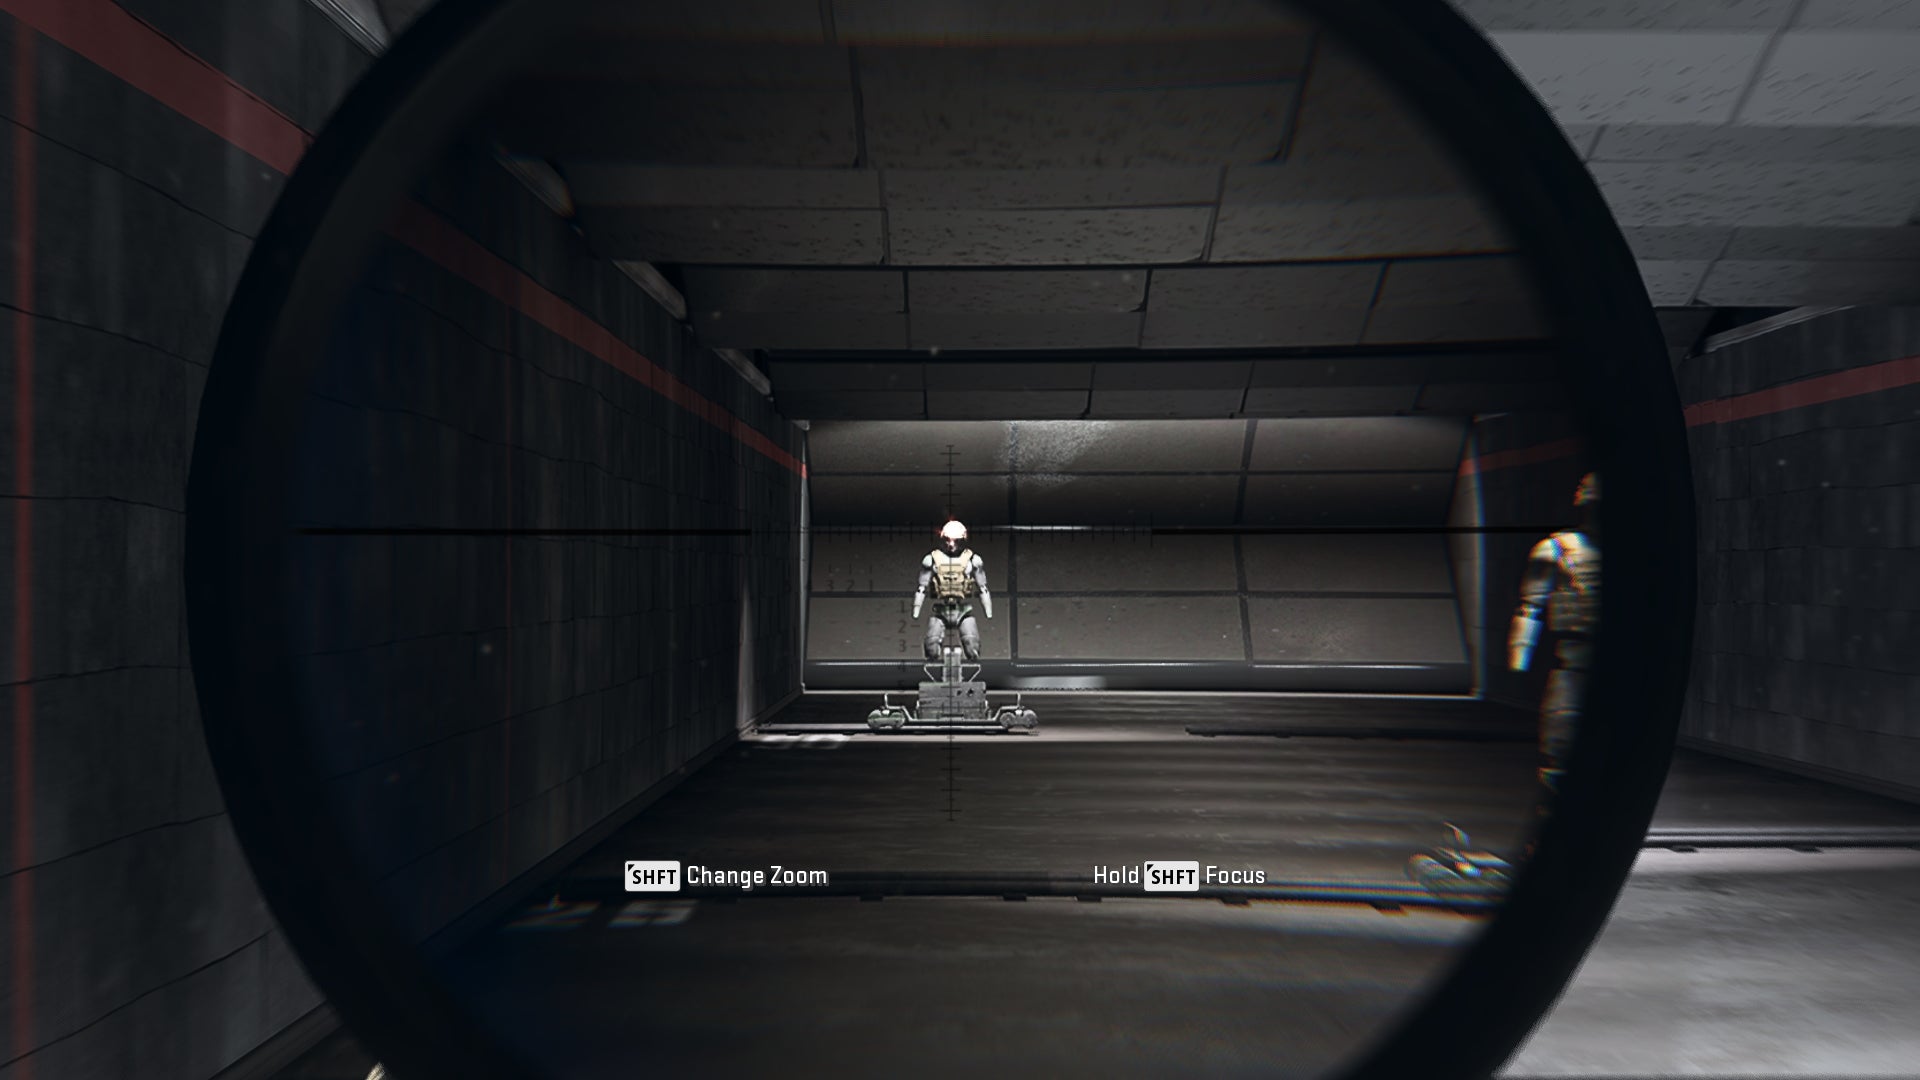 The player in Warzone 2.0 aims at a training dummy using the Signal 50 8x optic attachment.